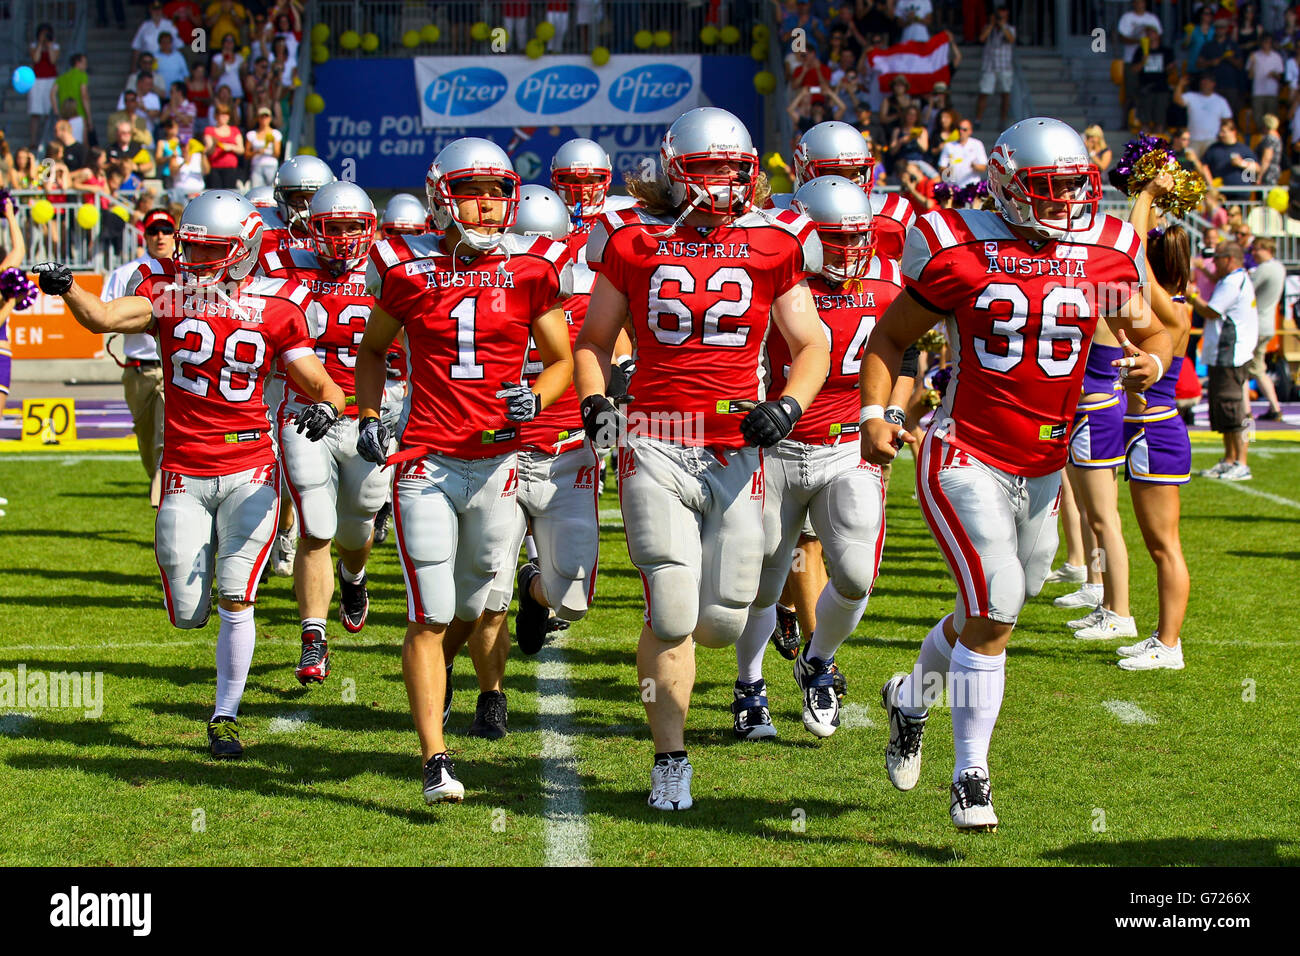 American Football, the Team of Rose Hulman College entering the Hohe Warte Stadium; Rose Hulman College wins the game against Stock Photo